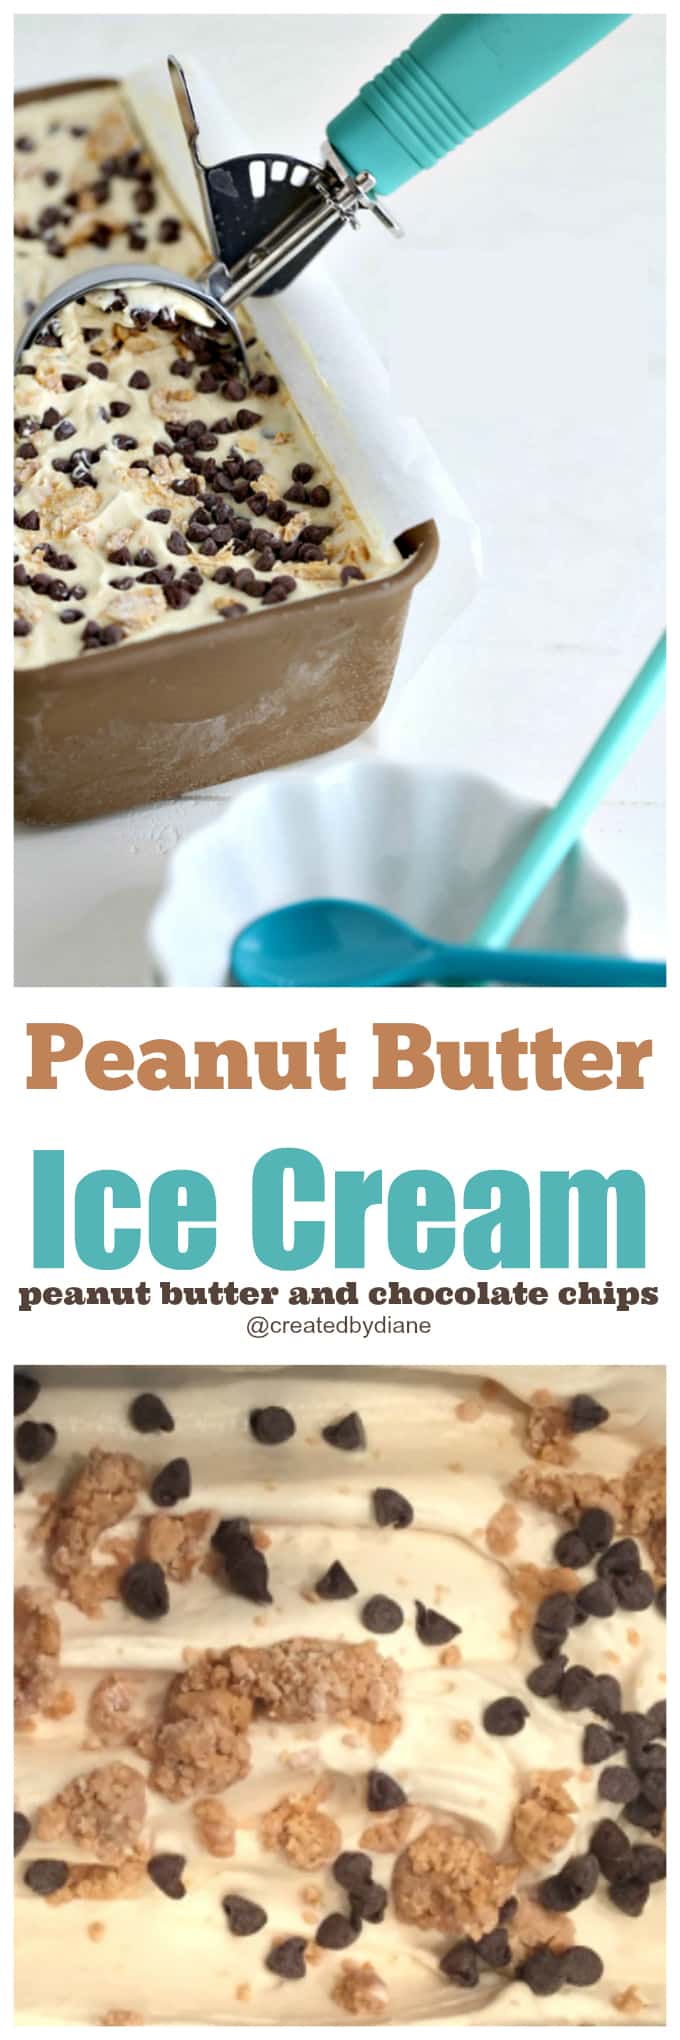 peanut butter ice cream with peanut butter pieces and chocolate chips recipe @createdbydiane